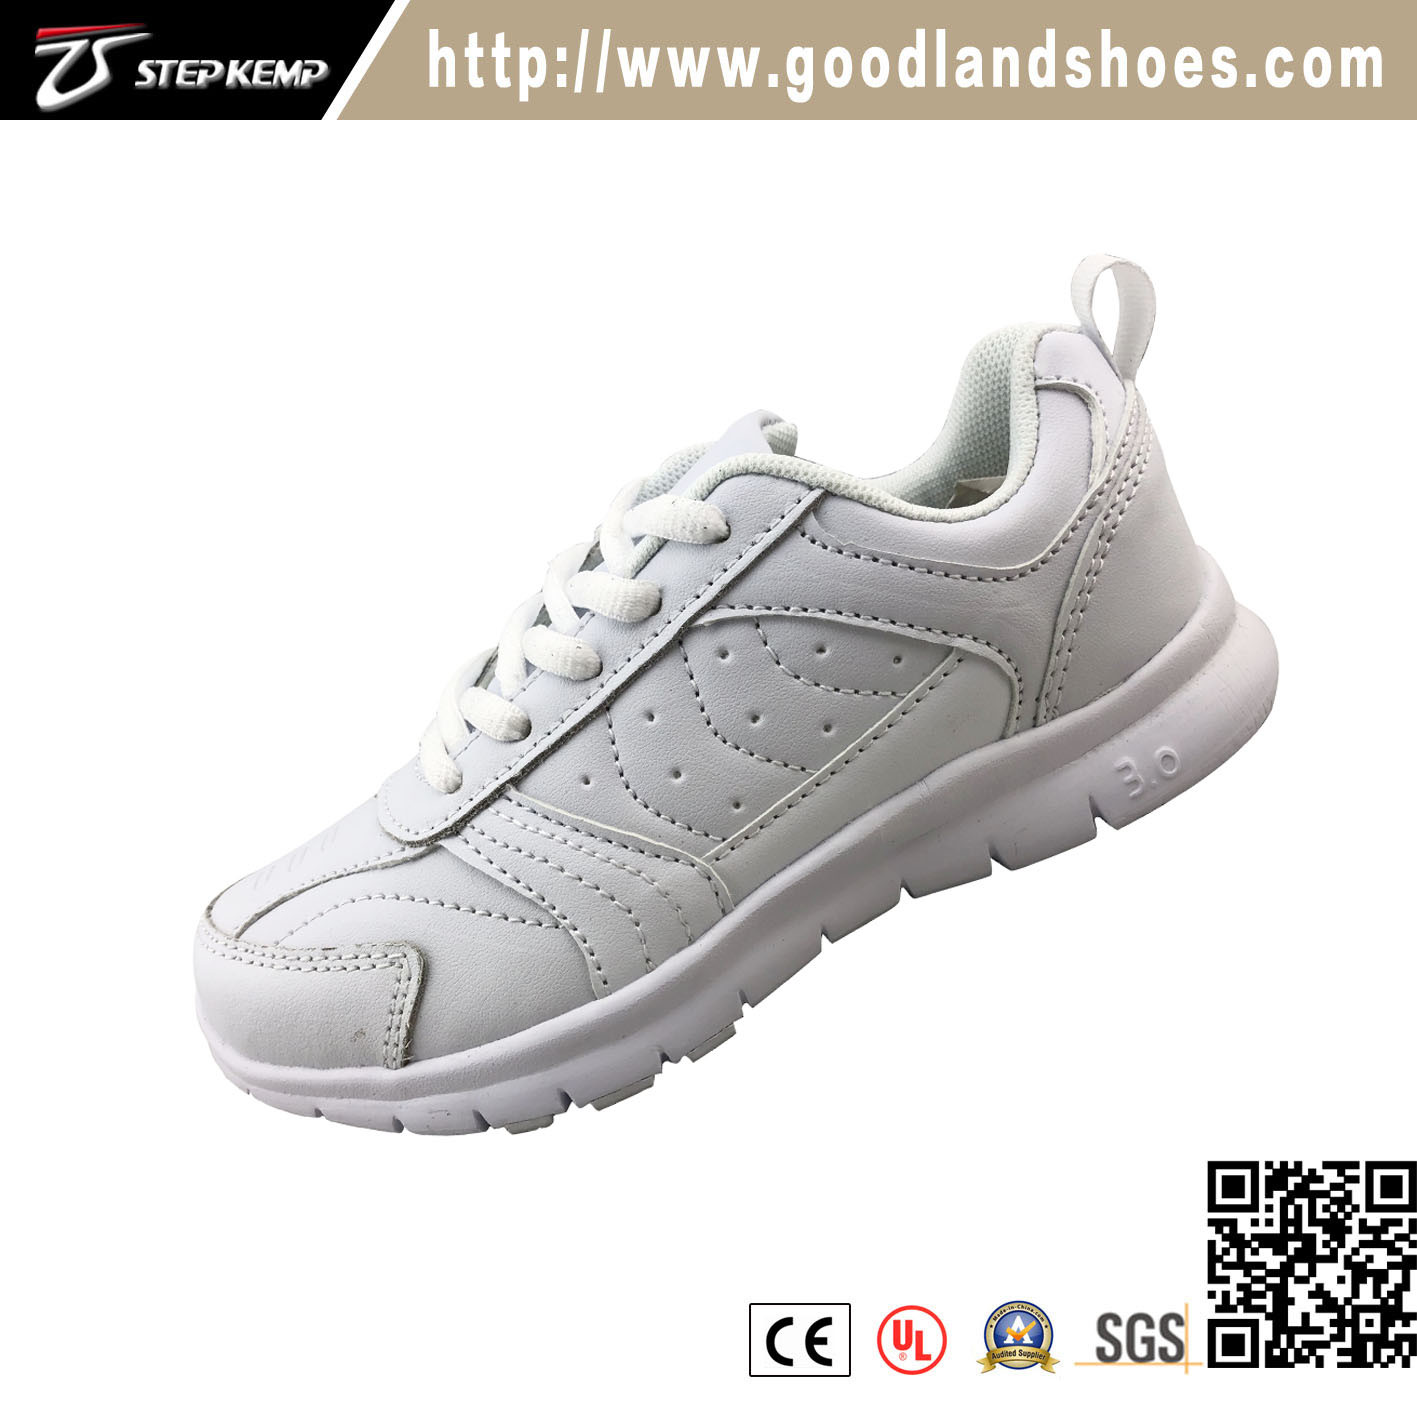 New Styler Kids Runing Sports Sneaker Casual White Shoes 20298